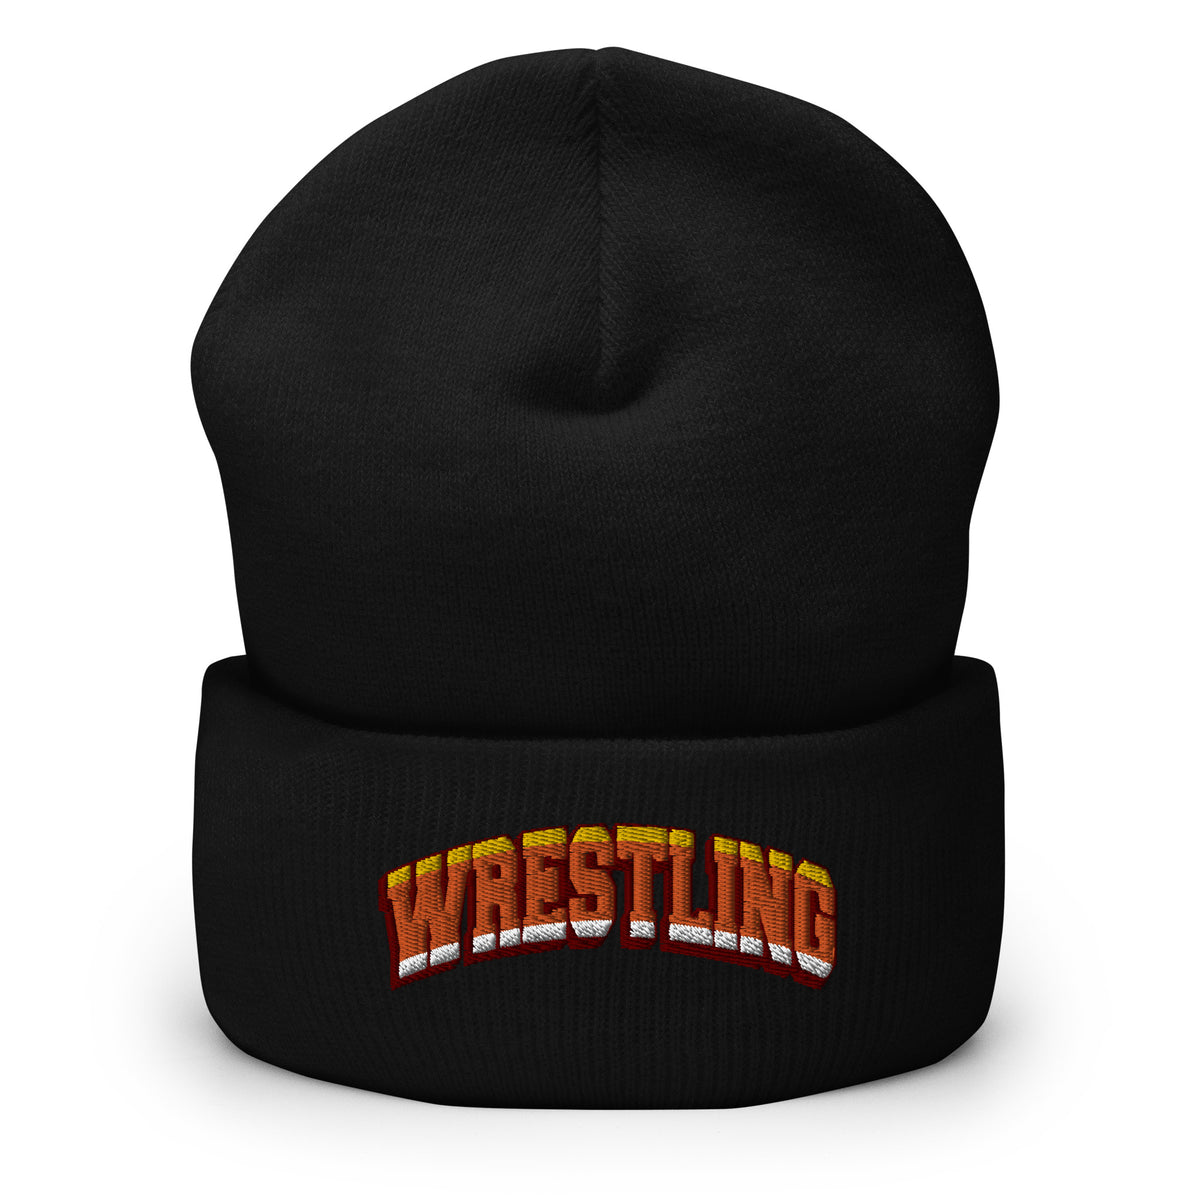 Candy Corn Wrestling Beanie - The Defensive Pin